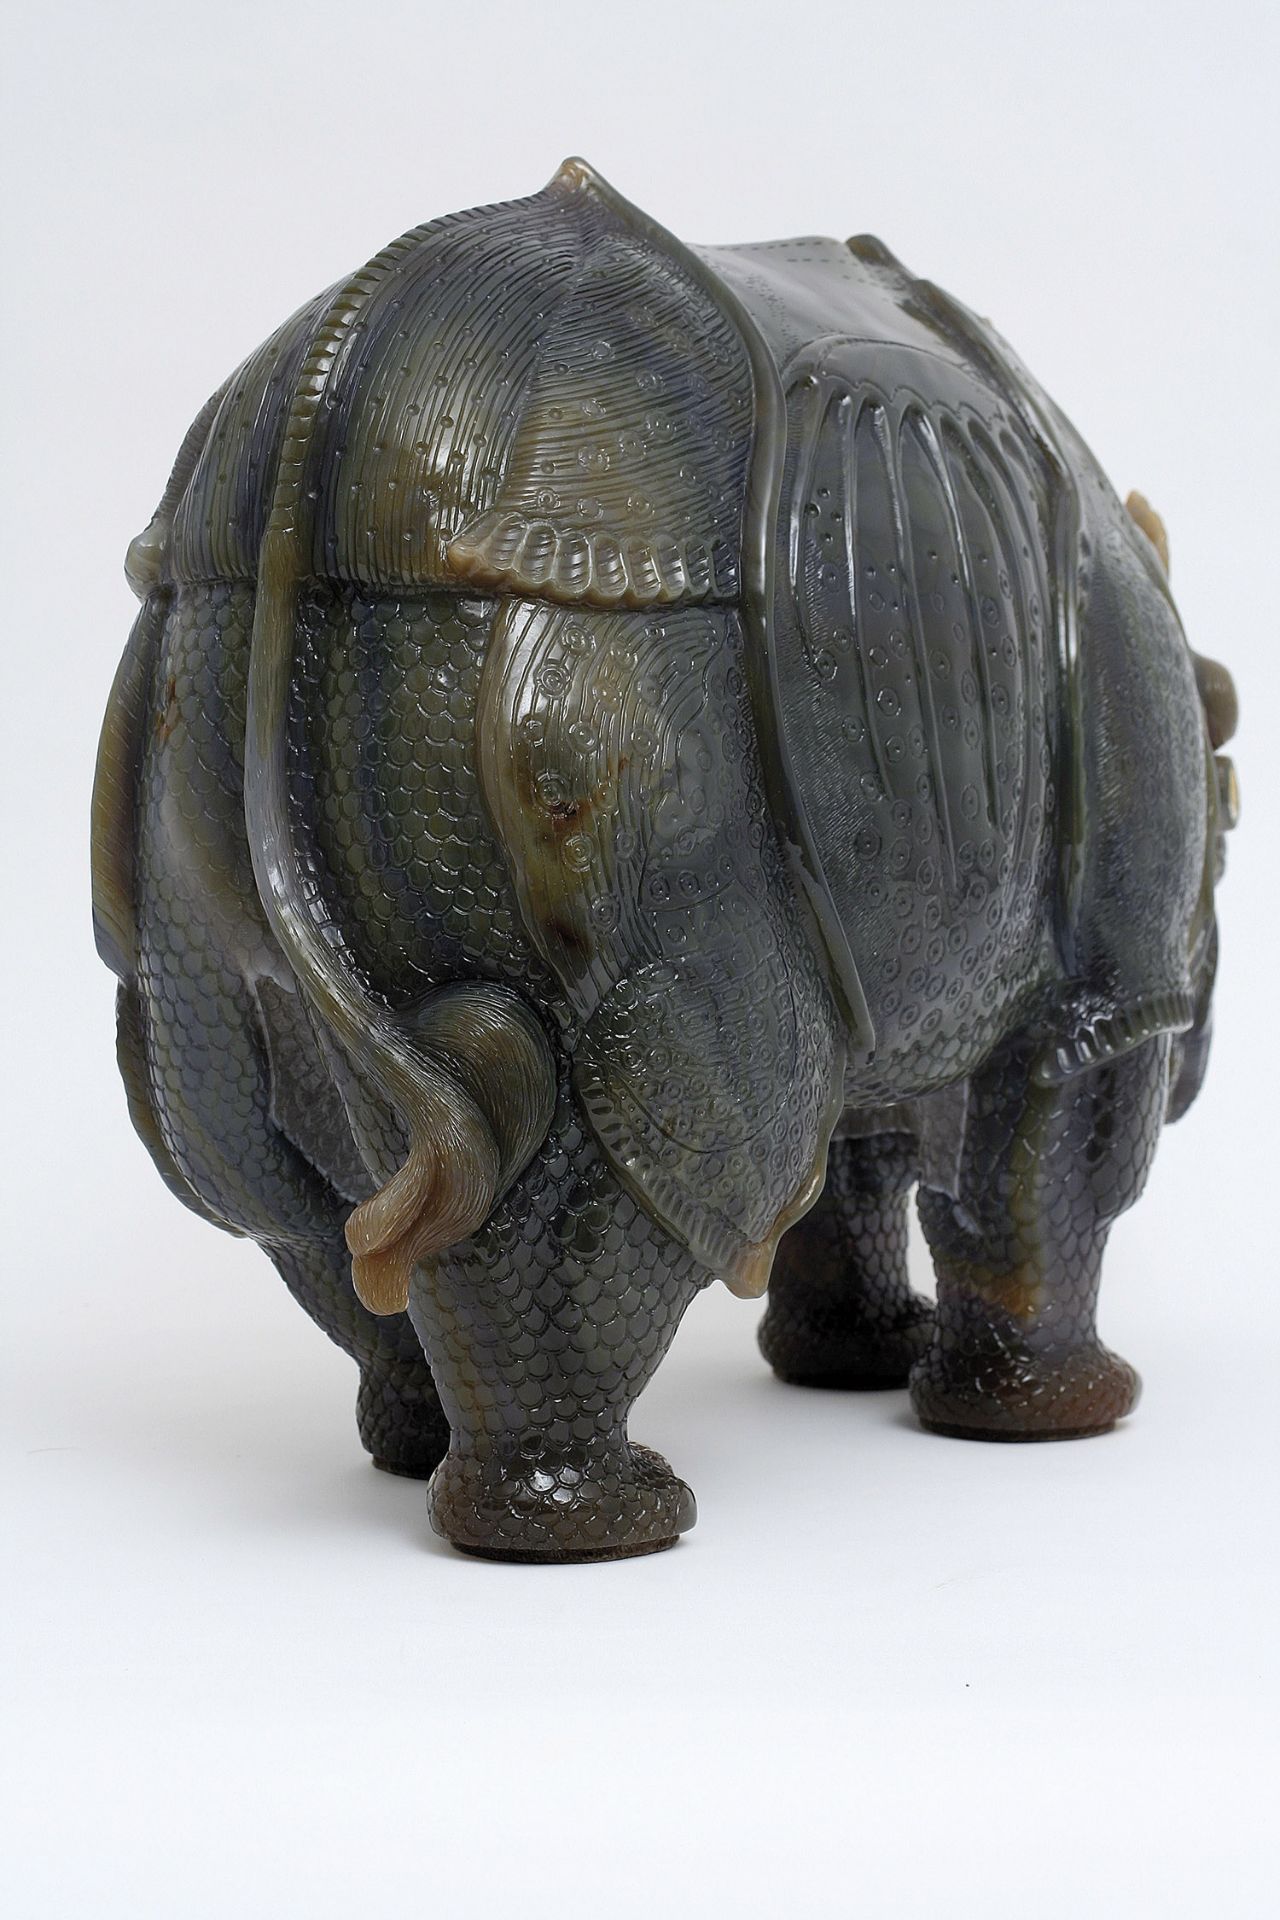 Monumental rhinoceros made of natural agate - Image 3 of 4